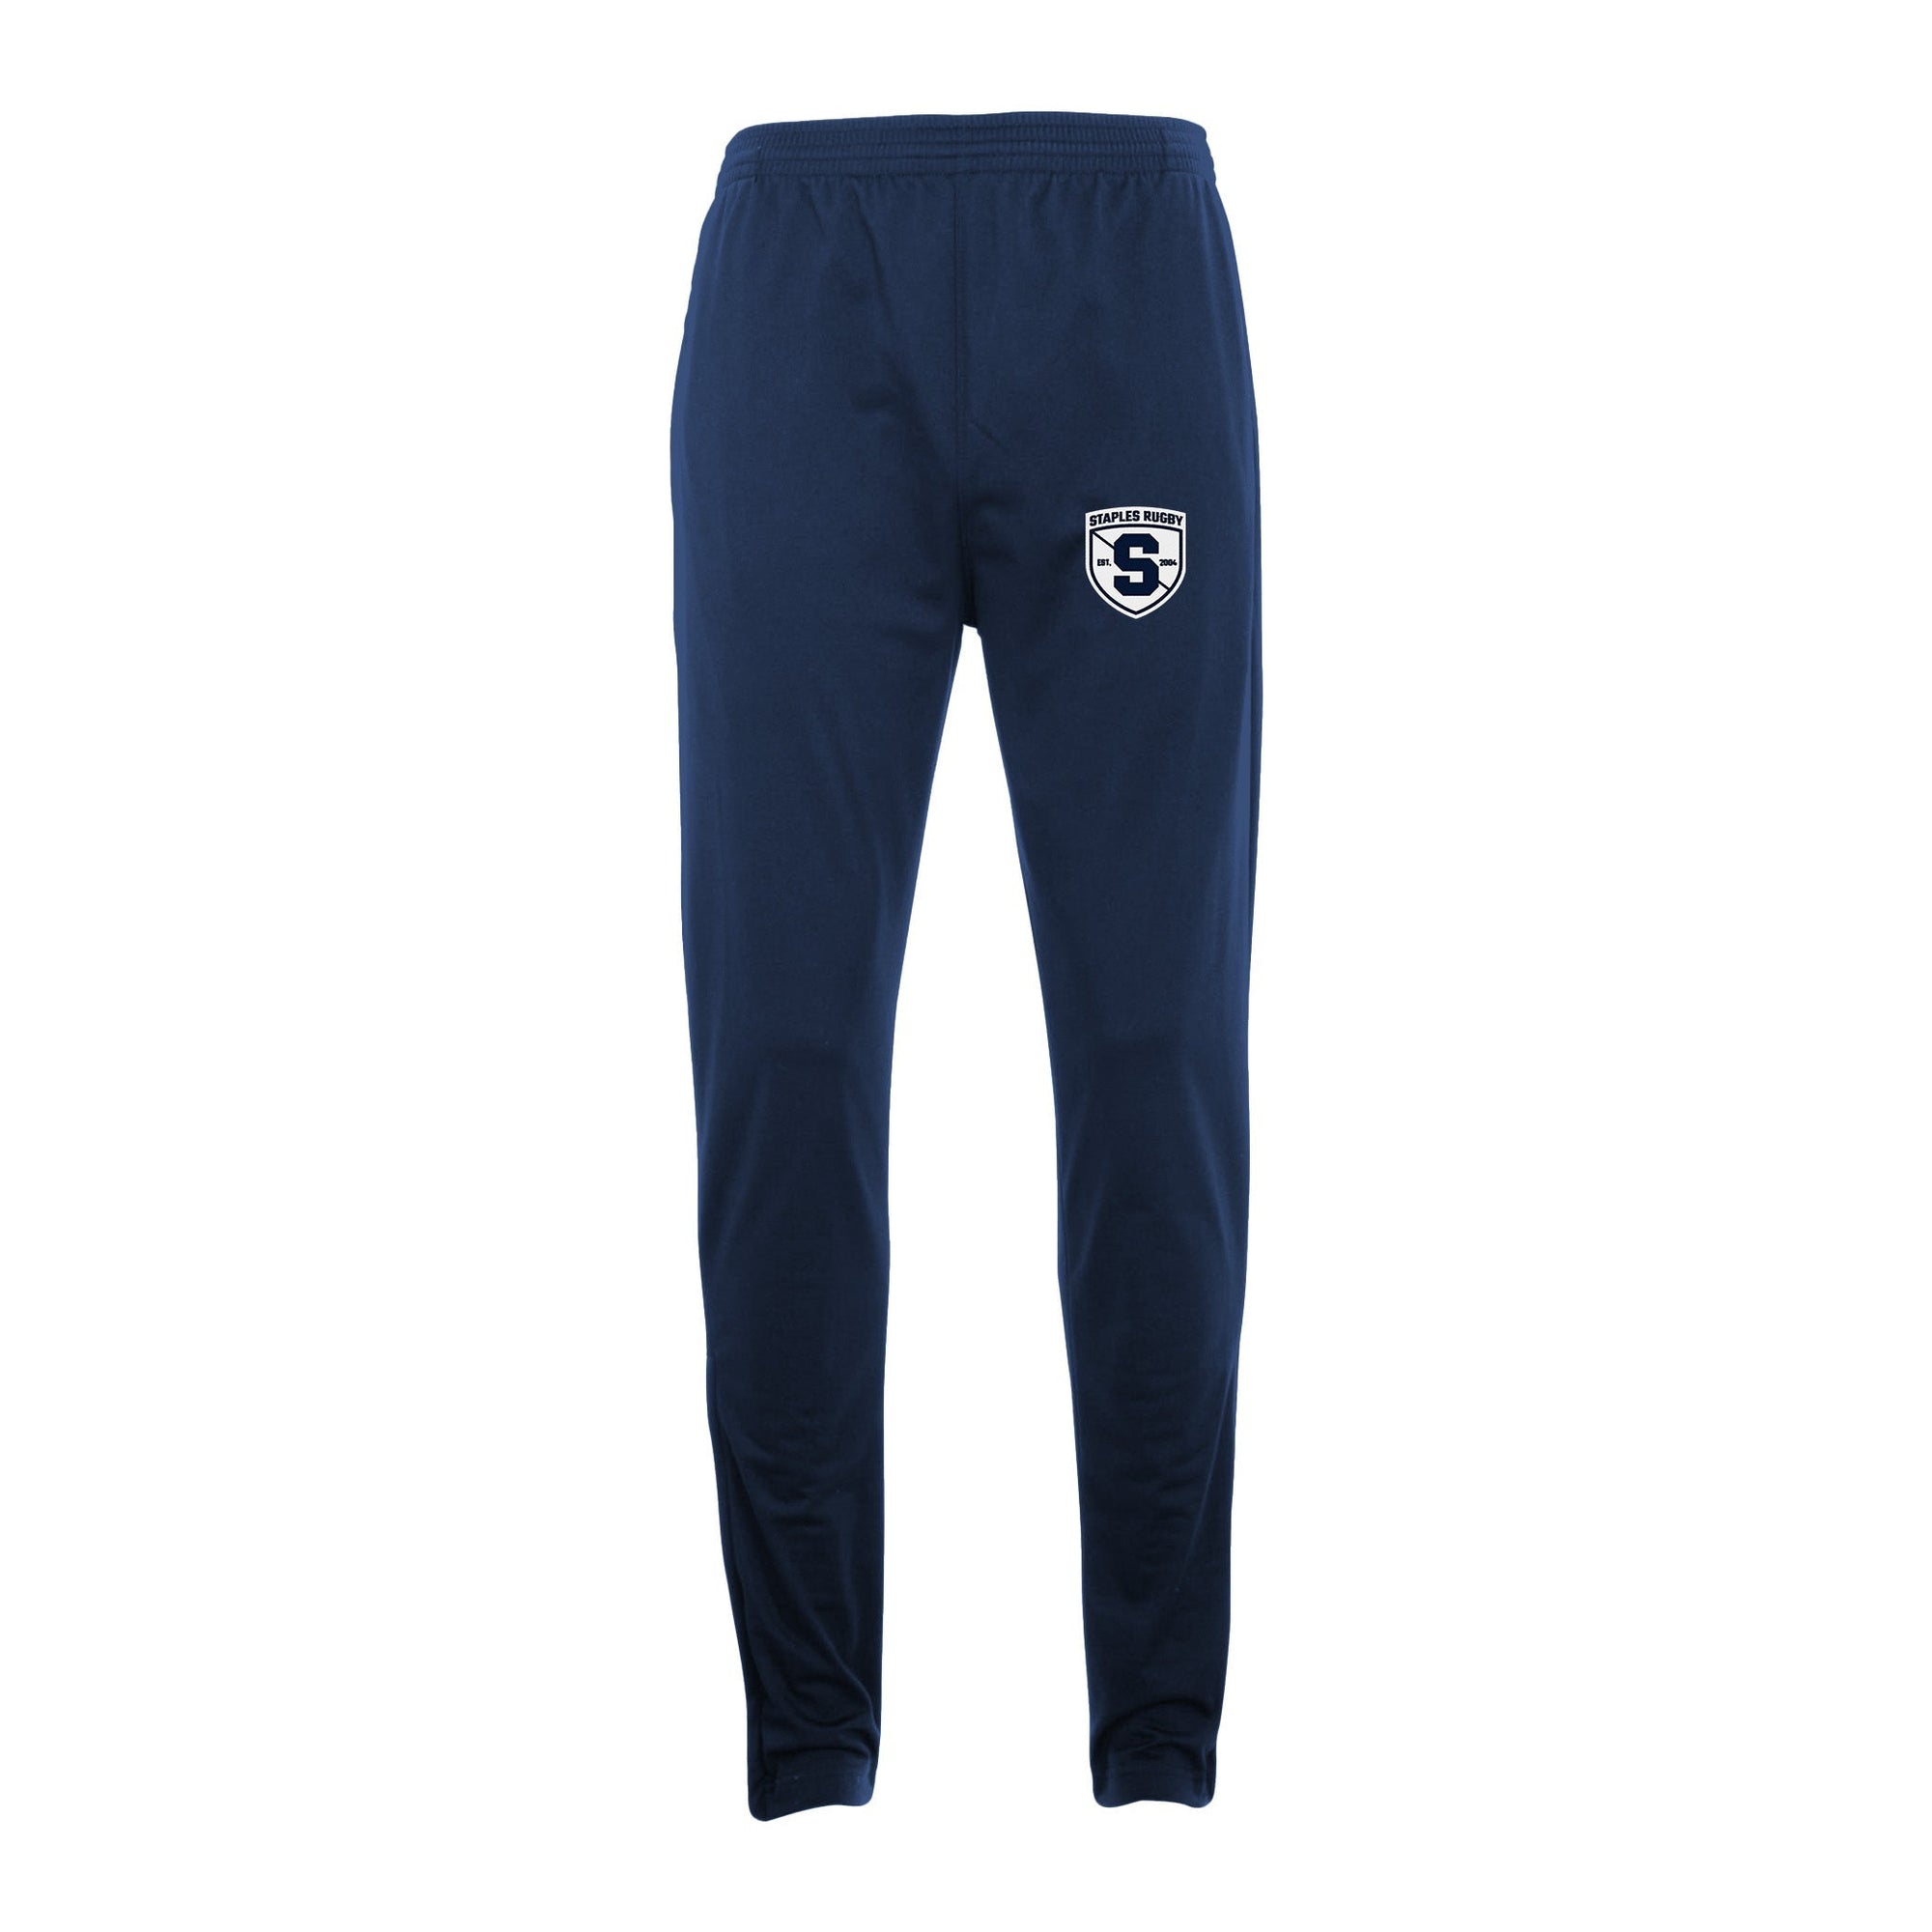 Rugby Imports Staples Rugby Unisex Tapered Leg Pant